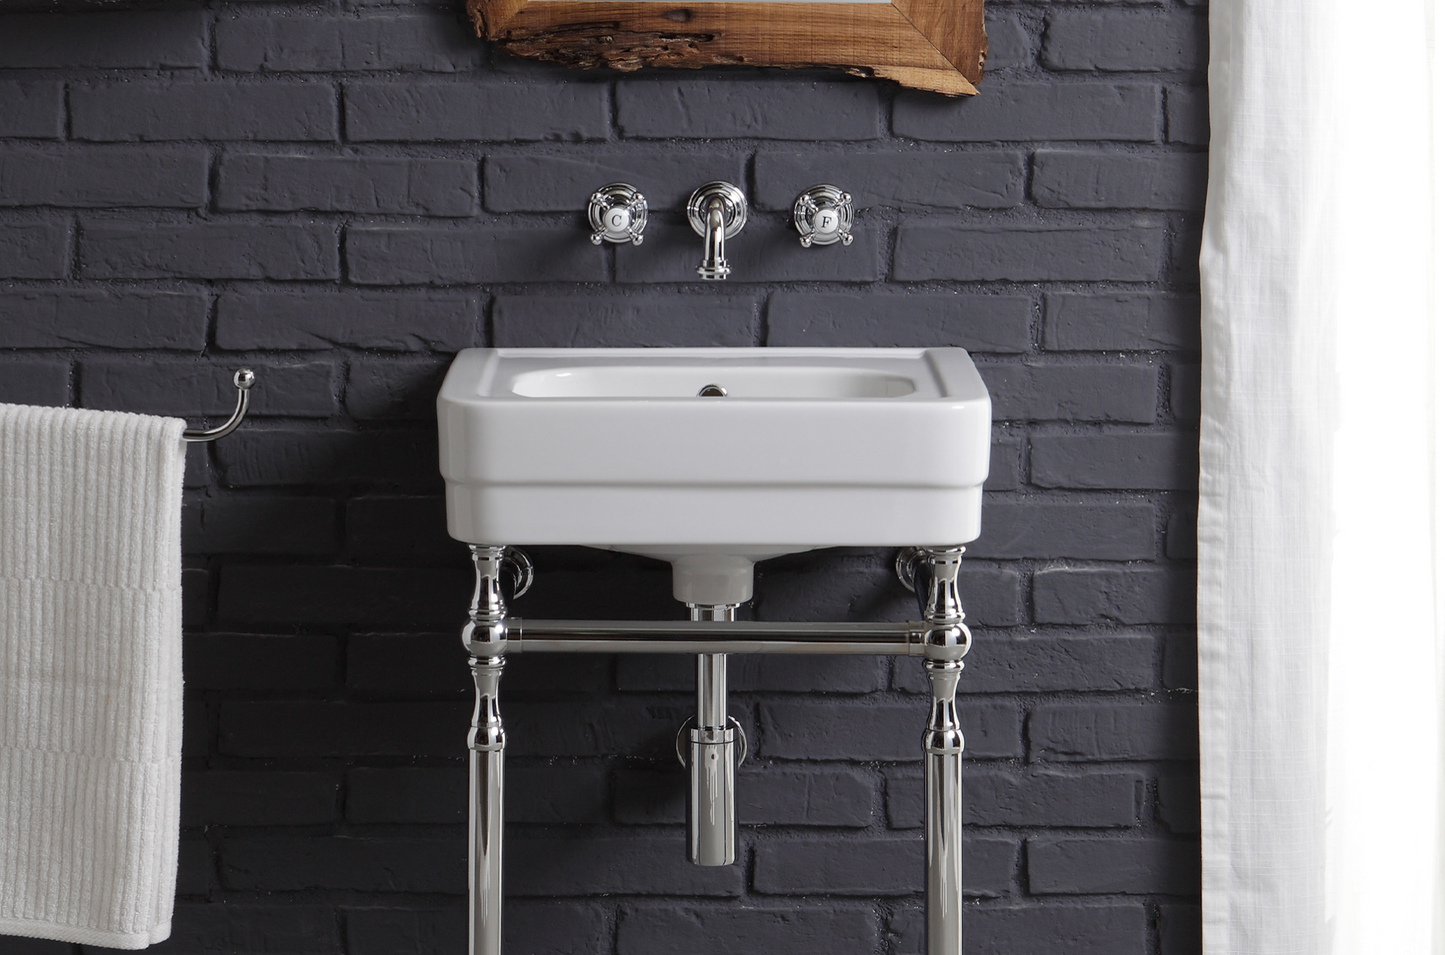 Balneo Toscia Vintage style built-in sink faucet